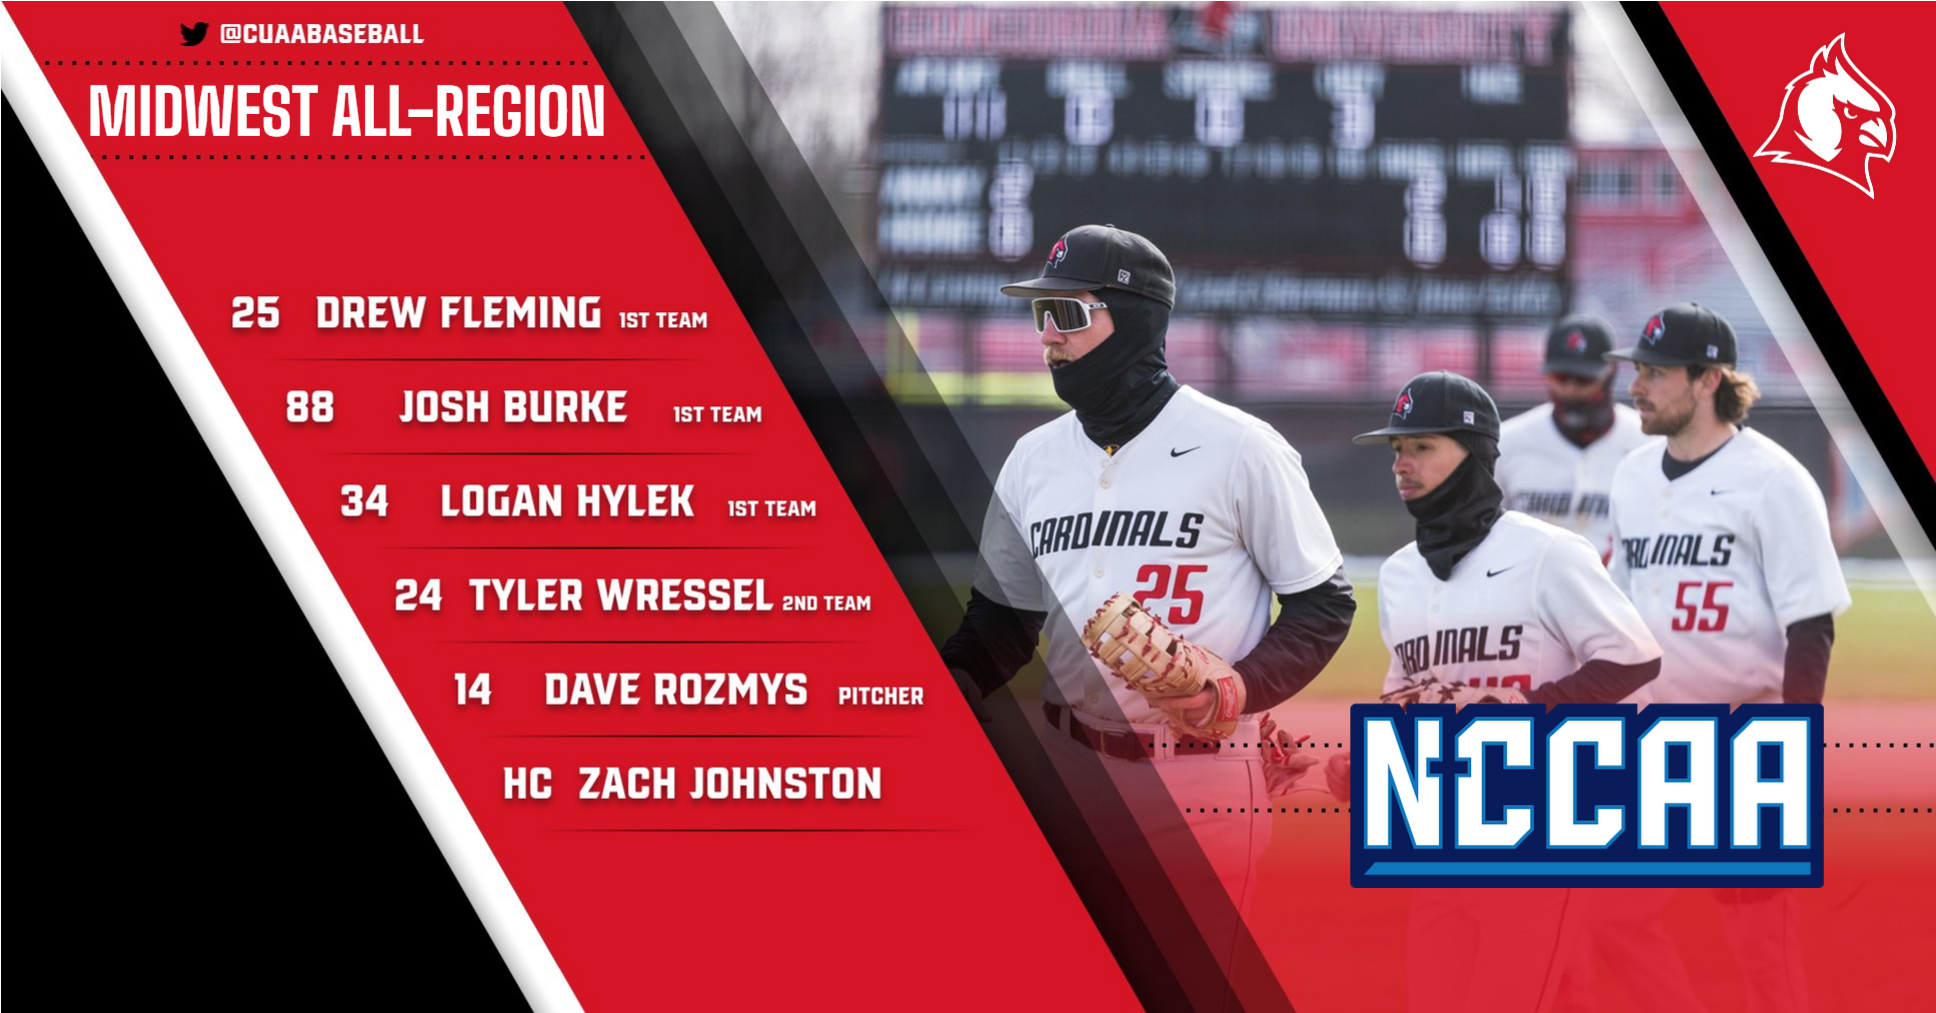 NCCAA Midwest All-Region Awards highlighted by Drew Fleming as Player of the Year, Dave Rozmys as Pitcher of the Year and Zach Johnston as Coach of the Year